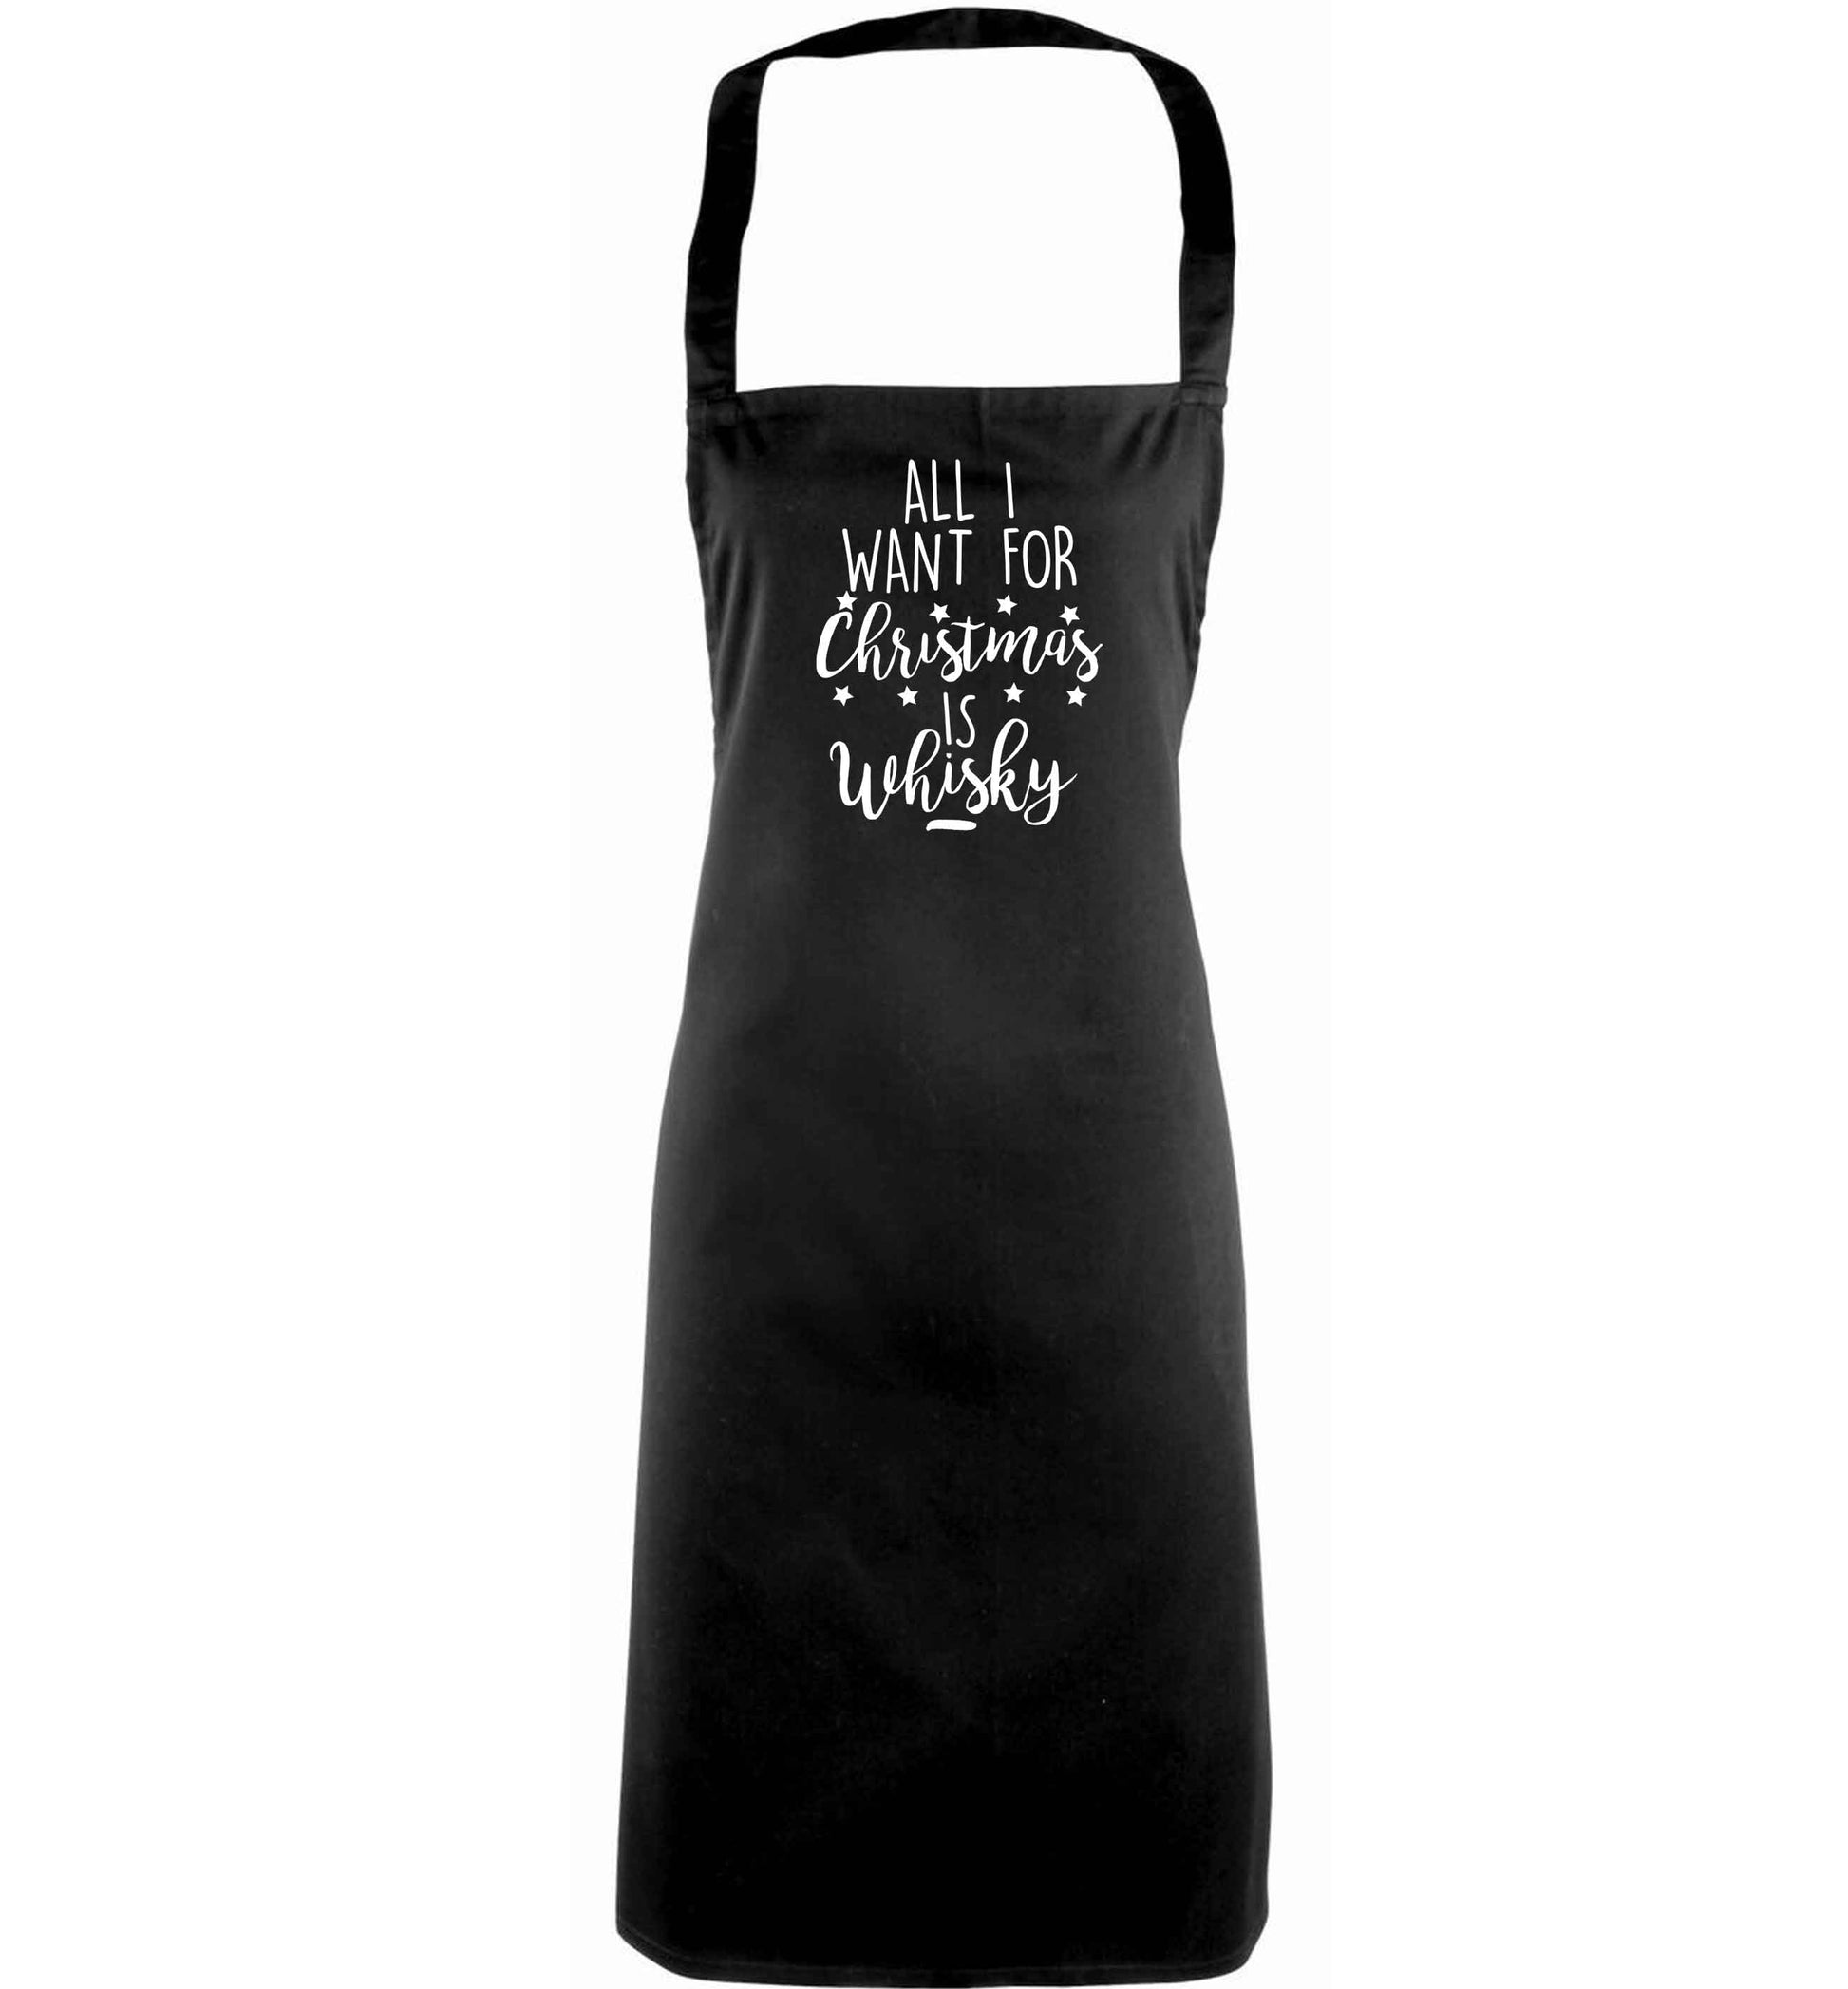 All I want for Christmas is whisky adults black apron